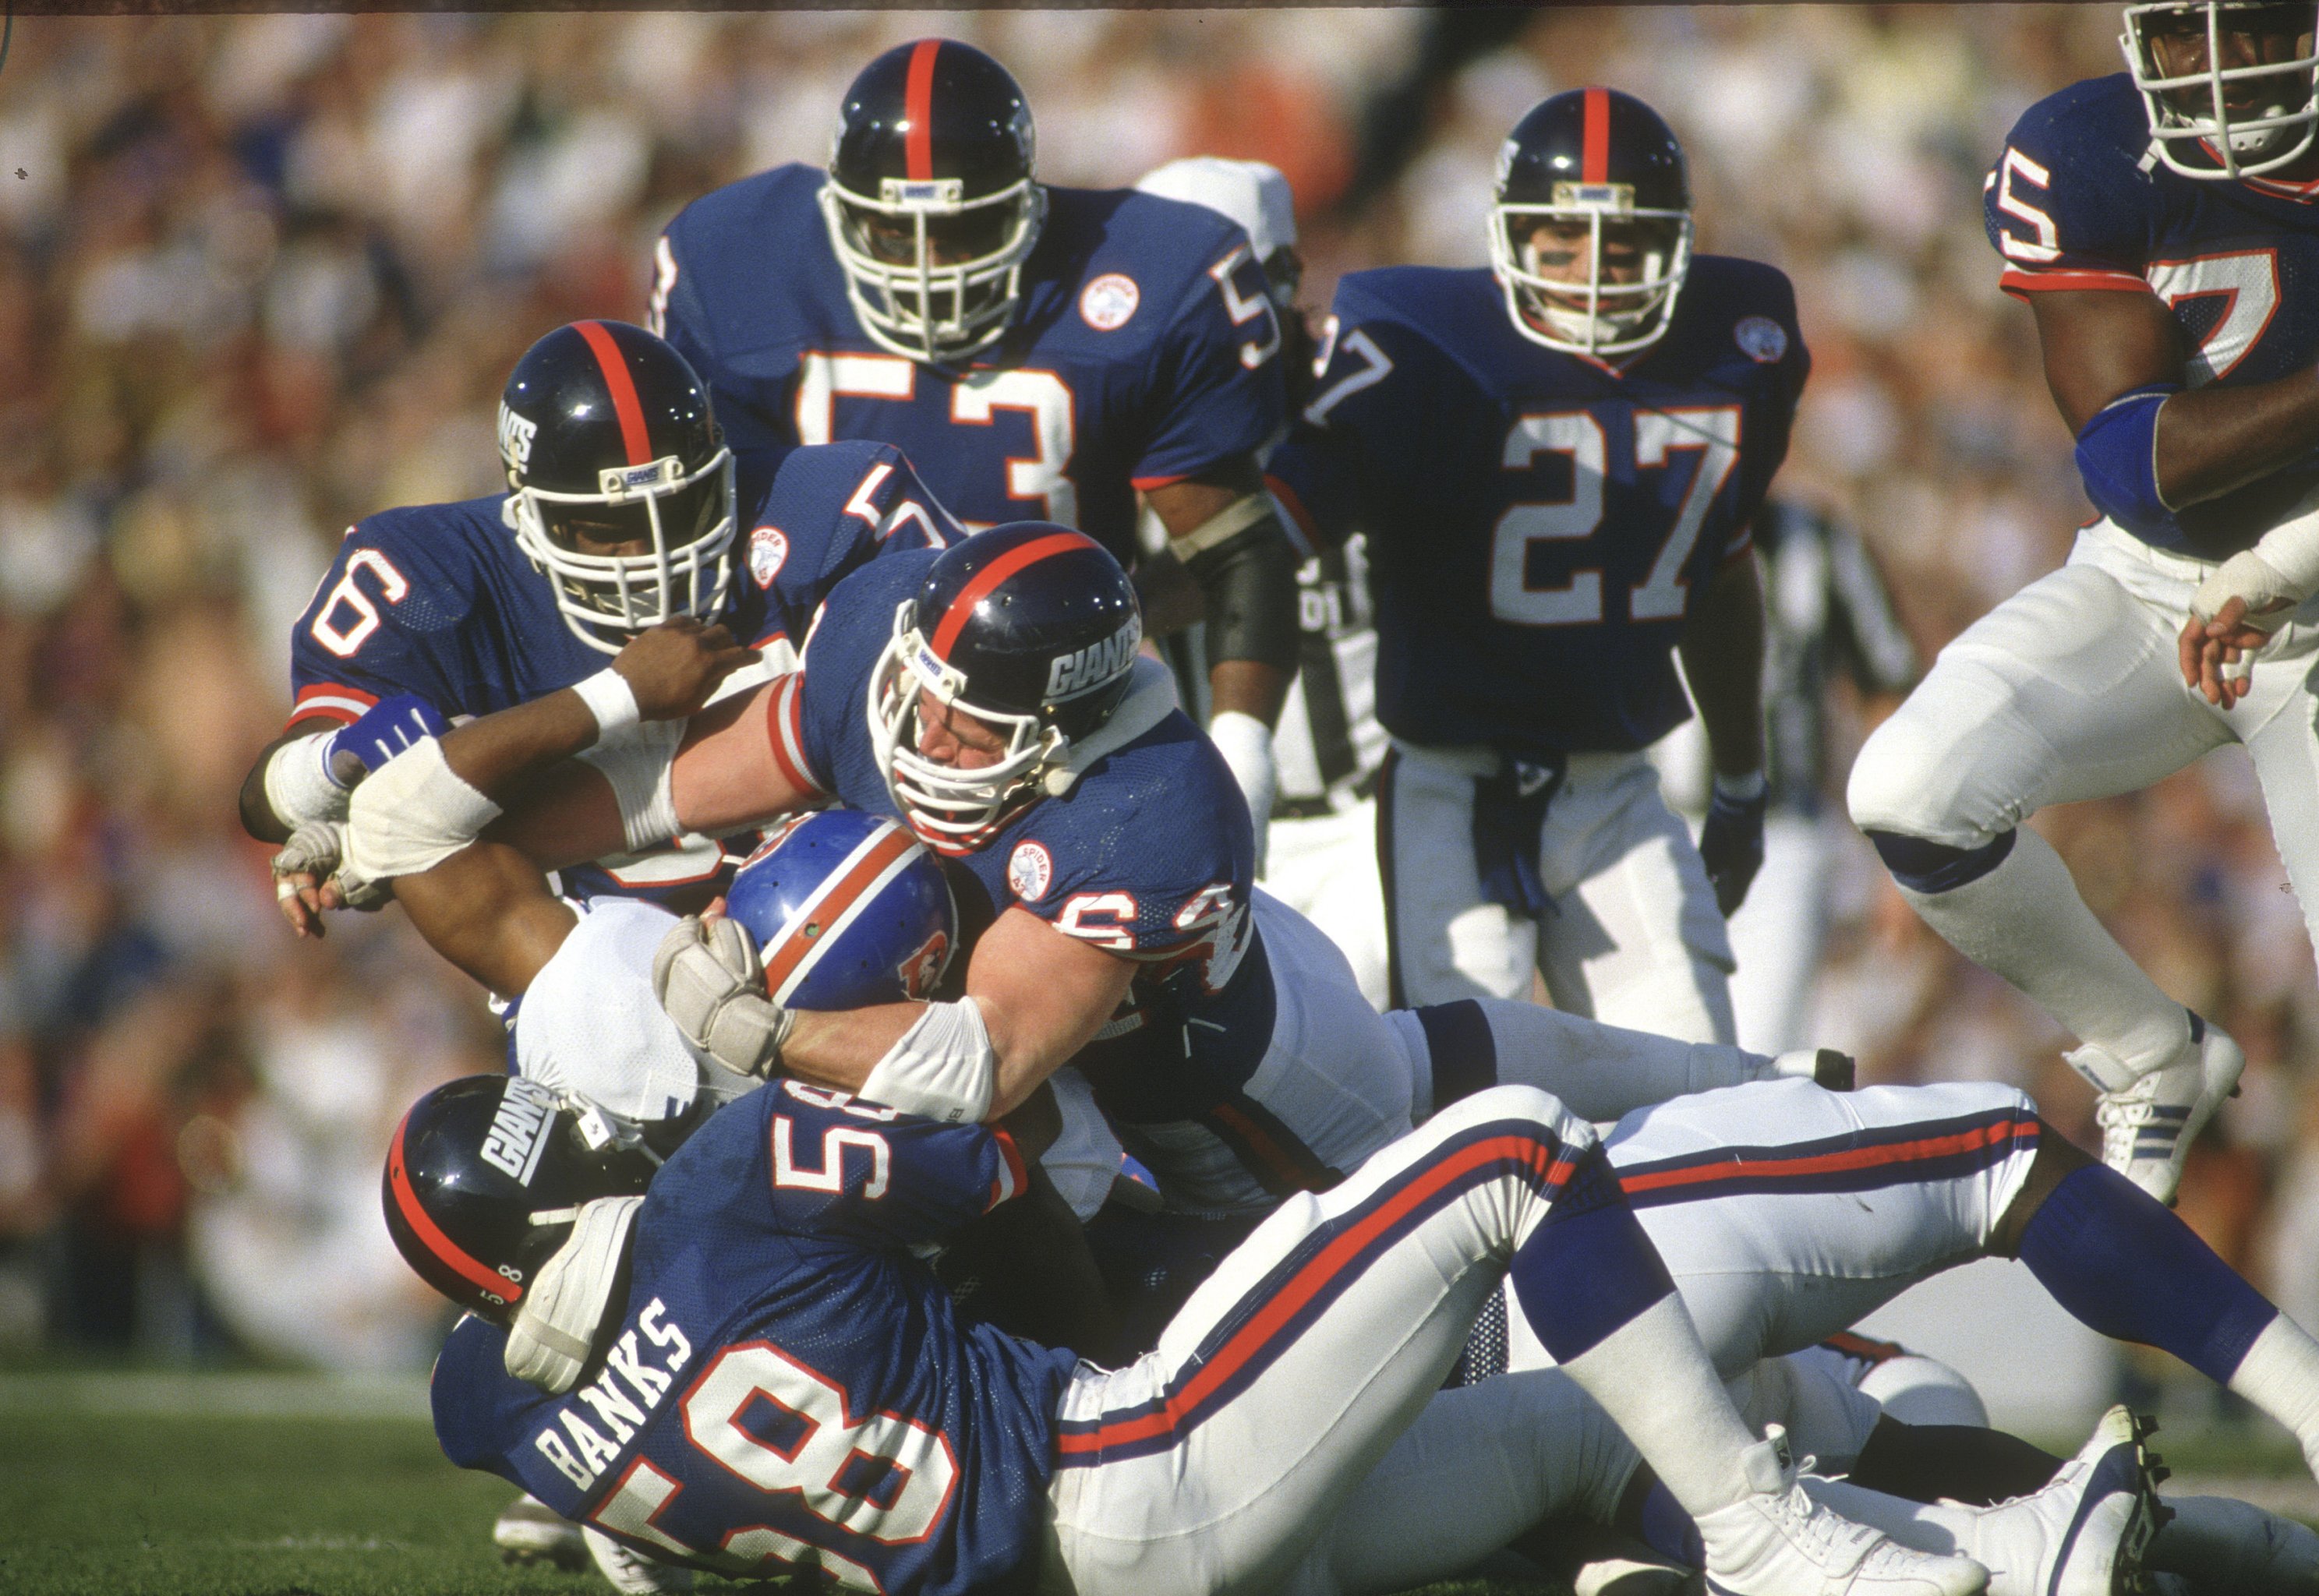 Super Bowl XII: Orange Crush D unable to overcome eight turnovers